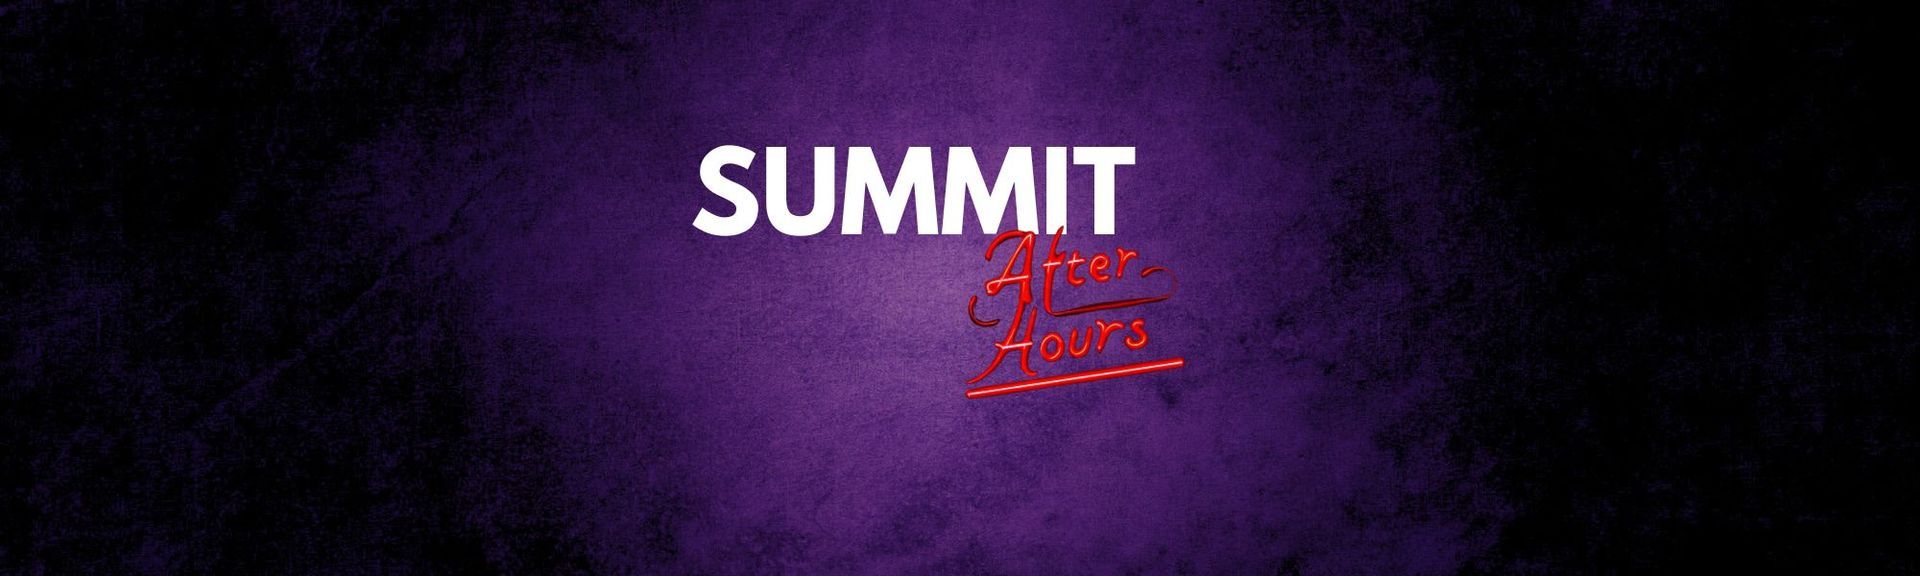 Adobe Summit After Hours